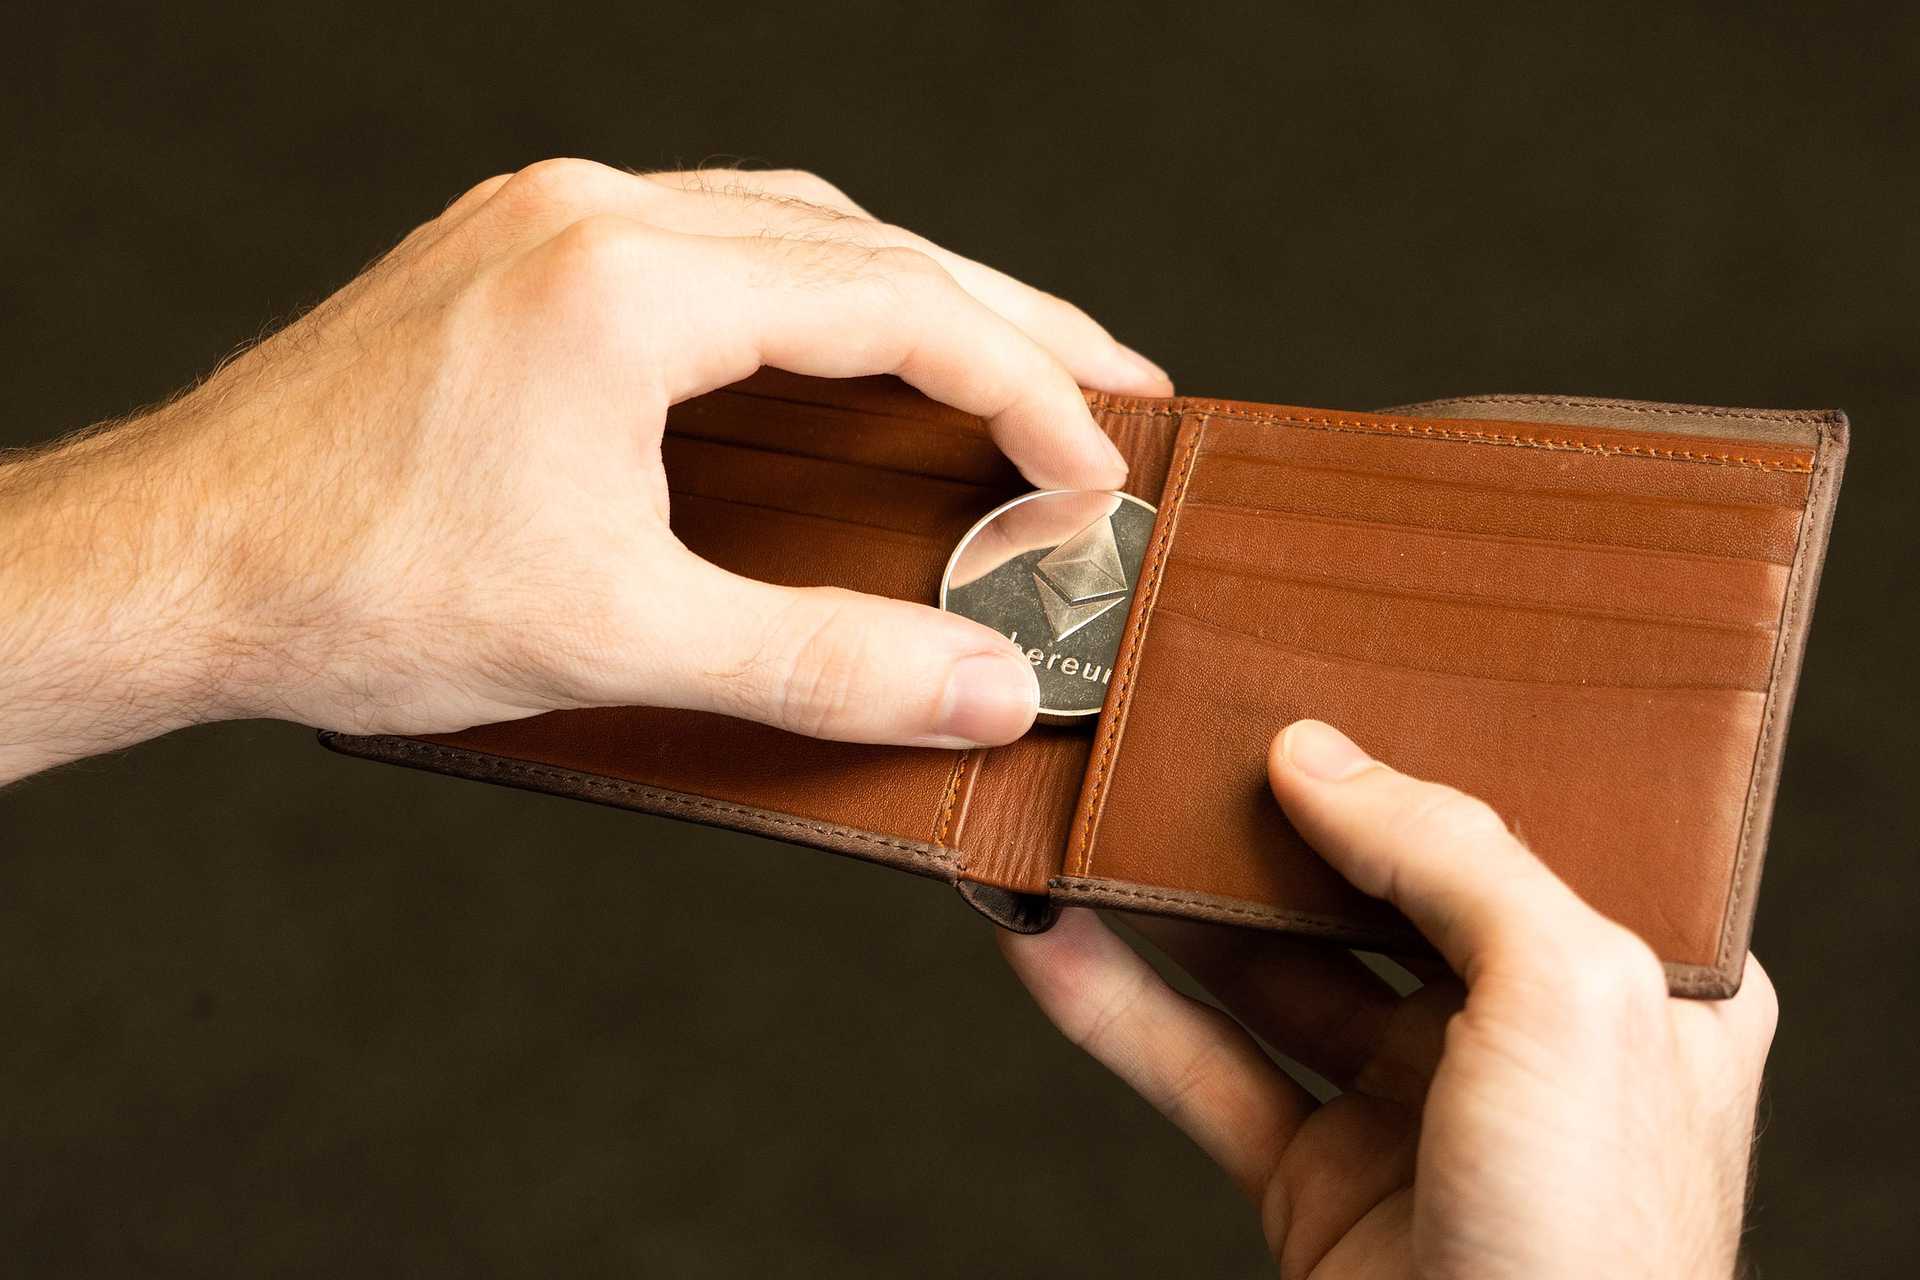  Image showing someone place an Ethereum coin inside a wallet.